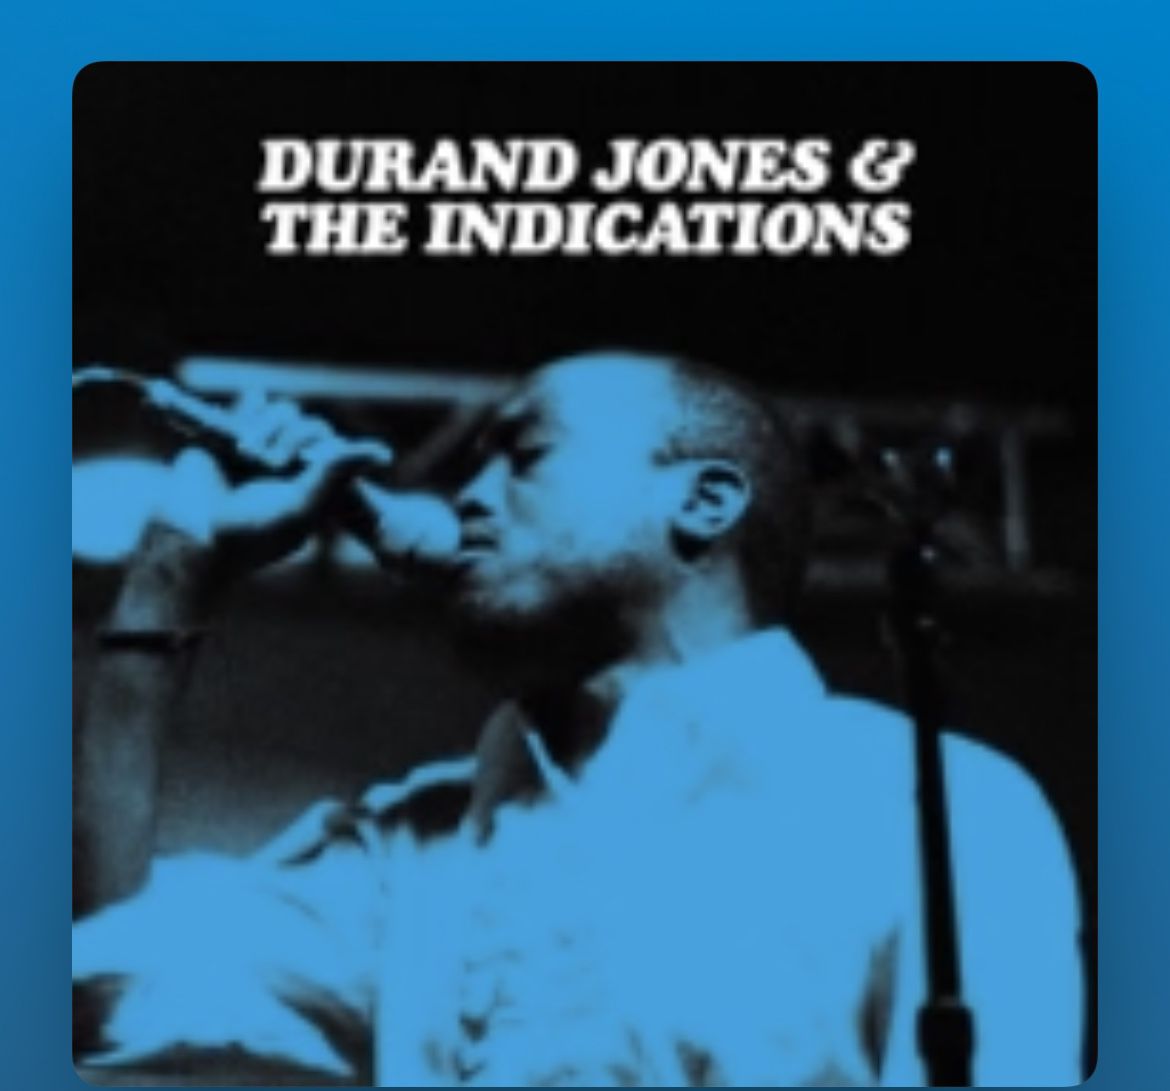 2 Tix To Durand Jones And The Indications